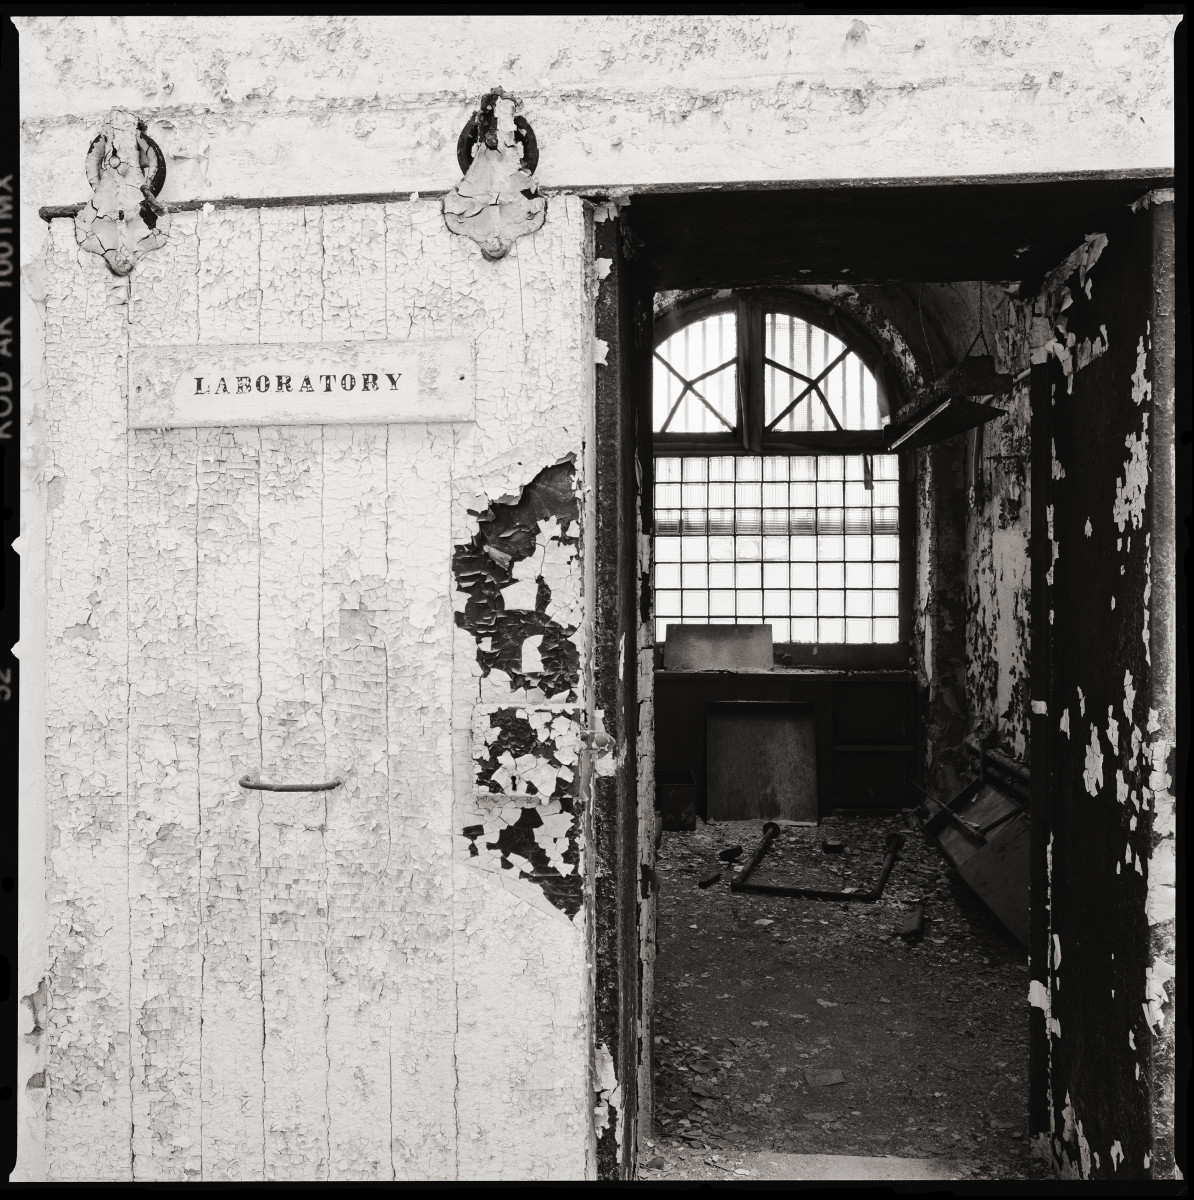 Laboratory by Eric T. Kunsman  Image: ID: A black and white image shows an open doorway entrance with a sign for "Laboratory" on the left on the door.  On the right the room is visible.  There is a large window with bars across it.  There is a lot of dirt and debris on the ground in the room.